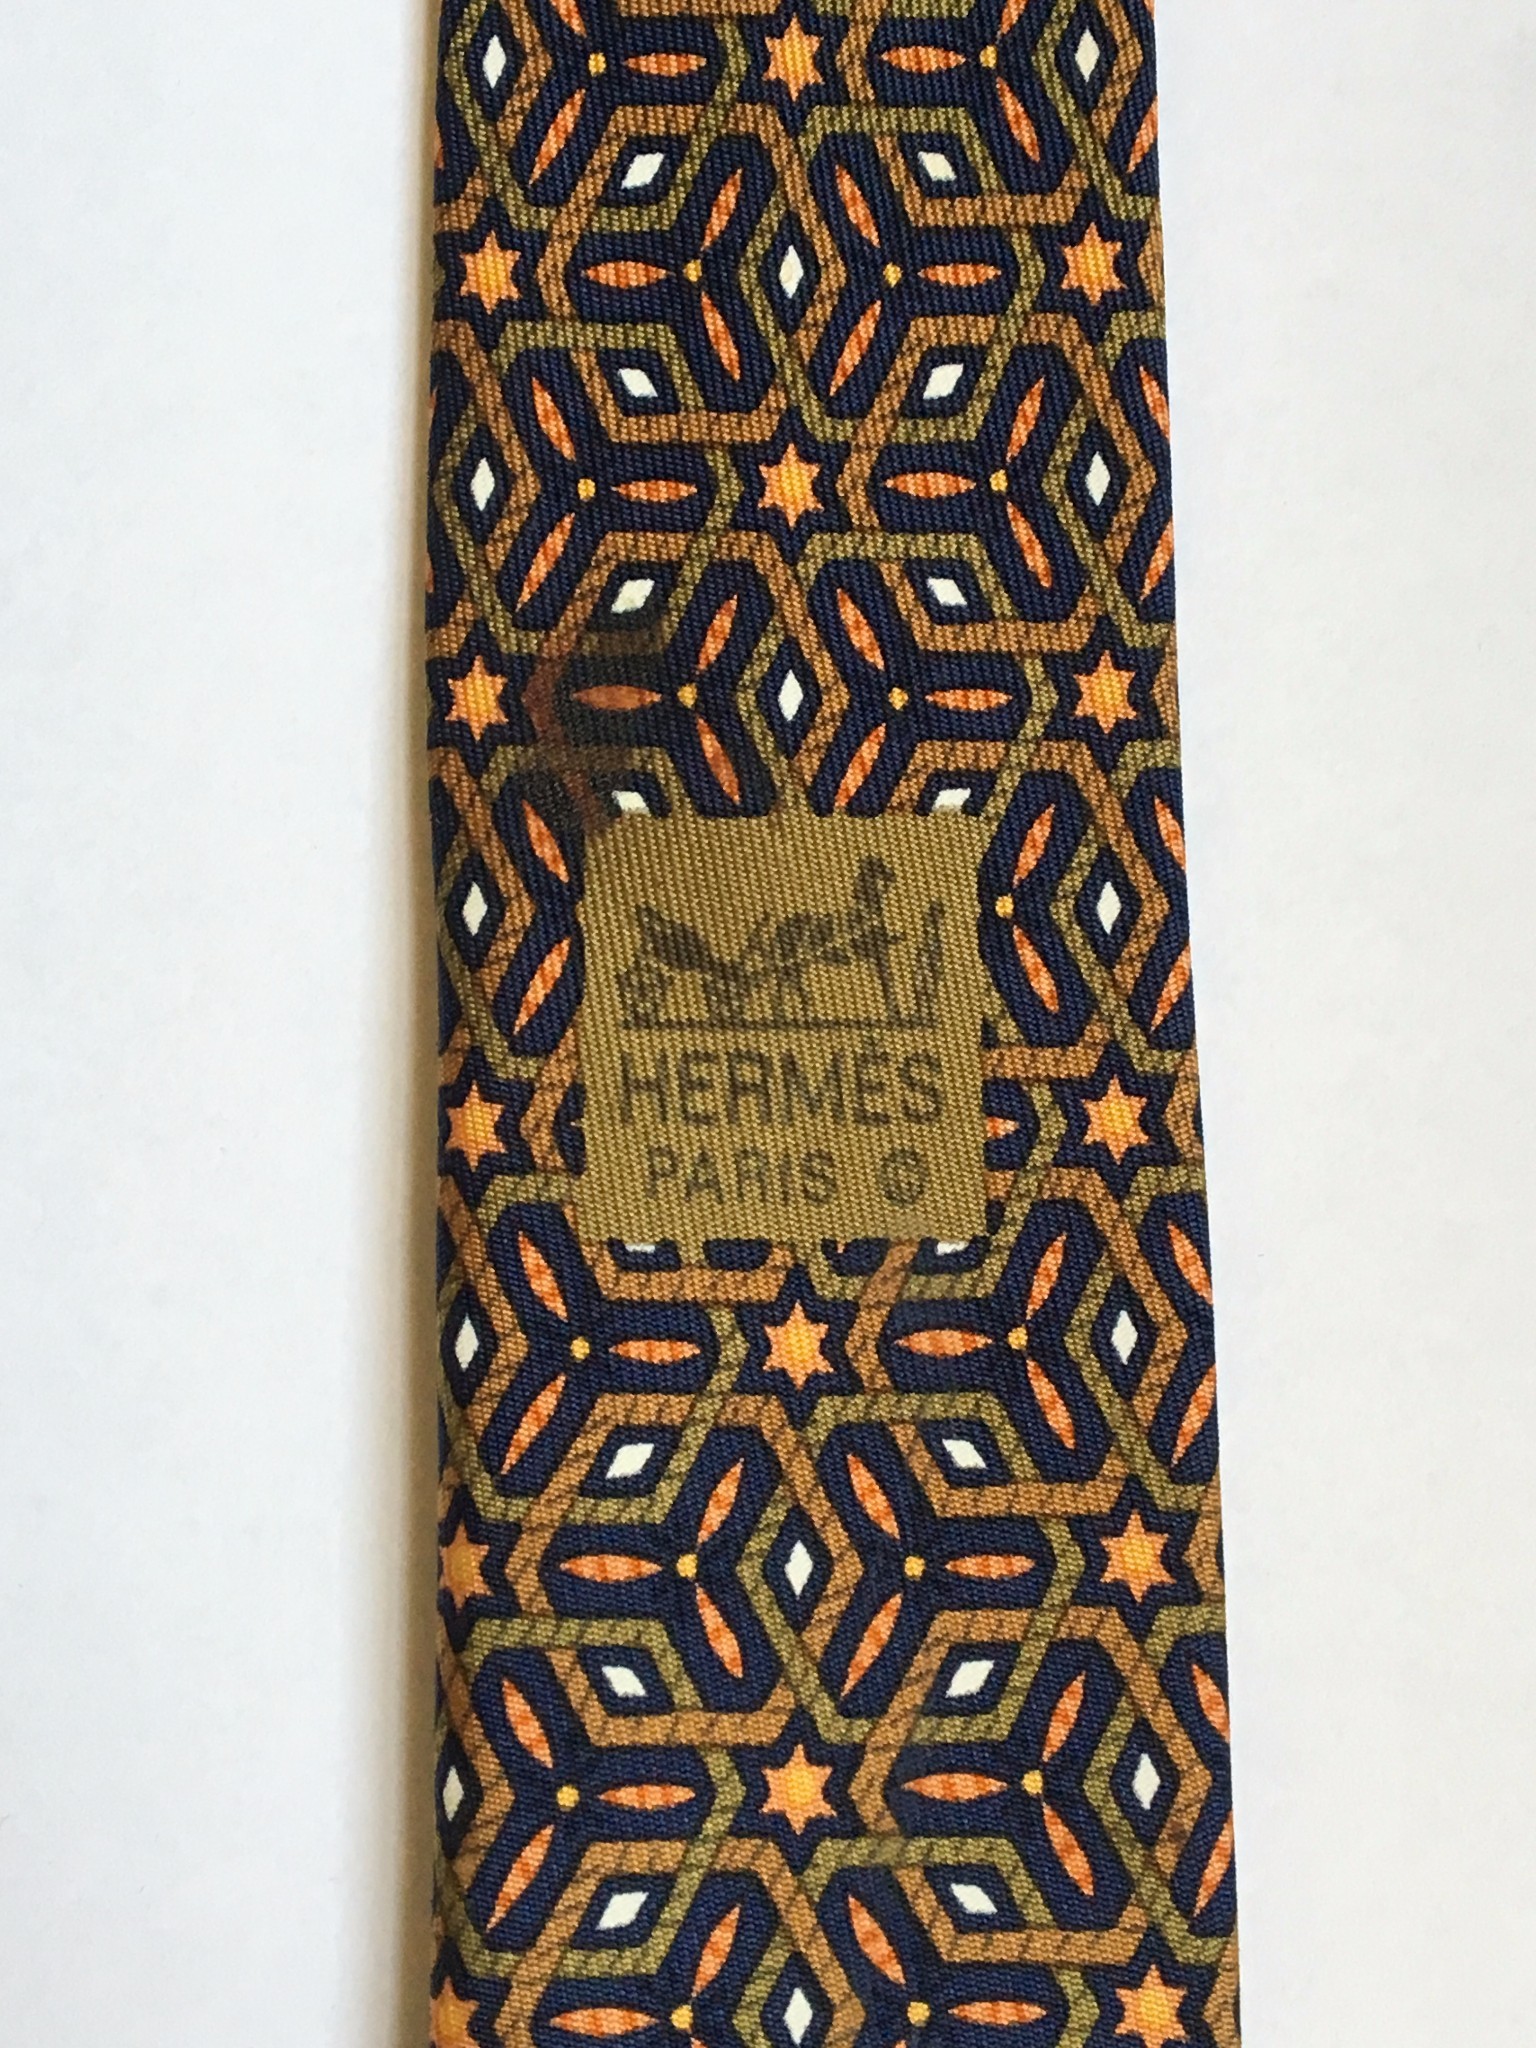 Is this Hermes and YSL tie real?